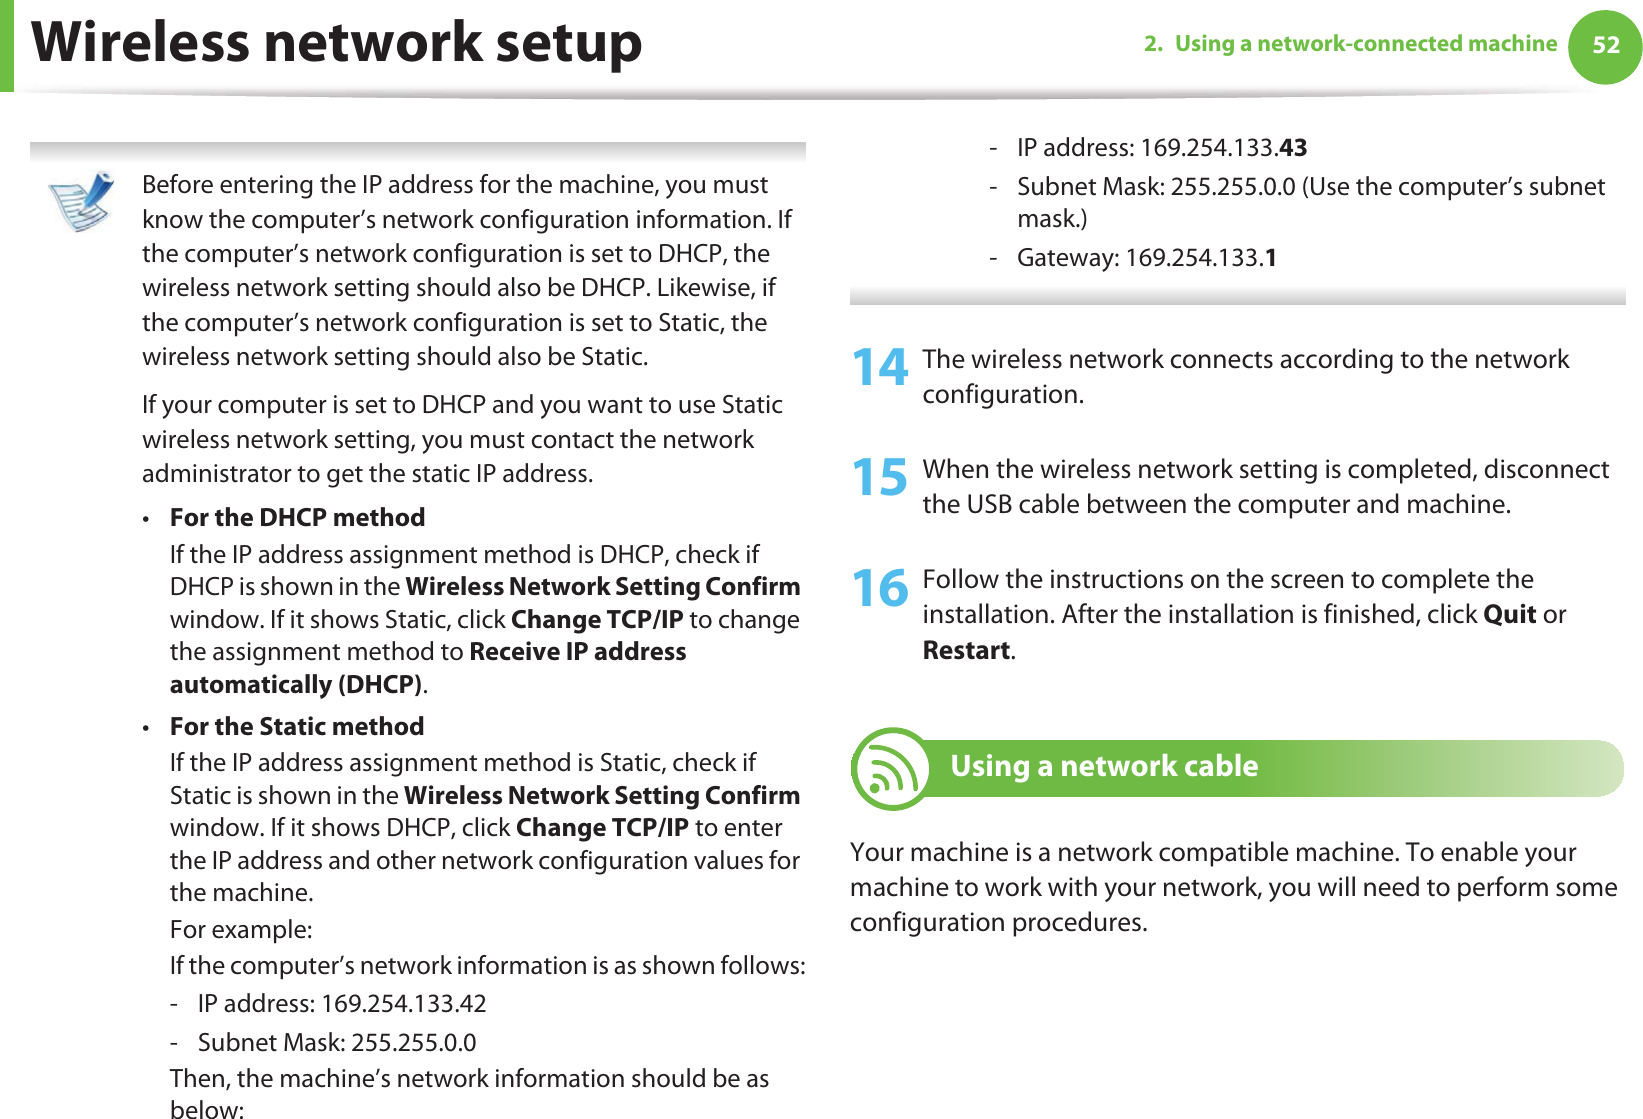 Wireless network setup 522. Using a network-connected machine Before entering the IP address for the machine, you must know the computer’s network configuration information. If the computer’s network configuration is set to DHCP, the wireless network setting should also be DHCP. Likewise, if the computer’s network configuration is set to Static, the wireless network setting should also be Static.If your computer is set to DHCP and you want to use Static wireless network setting, you must contact the network administrator to get the static IP address.•For the DHCP methodIf the IP address assignment method is DHCP, check if DHCP is shown in the Wireless Network Setting Confirm window. If it shows Static, click Change TCP/IP to change the assignment method to Receive IP address automatically (DHCP).•For the Static methodIf the IP address assignment method is Static, check if Static is shown in the Wireless Network Setting Confirm window. If it shows DHCP, click Change TCP/IP to enter the IP address and other network configuration values for the machine.For example:If the computer’s network information is as shown follows:- IP address: 169.254.133.42- Subnet Mask: 255.255.0.0Then, the machine’s network information should be as below:- IP address: 169.254.133.43- Subnet Mask: 255.255.0.0 (Use the computer’s subnet mask.)- Gateway: 169.254.133.1 14 The wireless network connects according to the network configuration.15 When the wireless network setting is completed, disconnect the USB cable between the computer and machine. 16 Follow the instructions on the screen to complete the installation. After the installation is finished, click Quit or Restart.18 Using a network cableYour machine is a network compatible machine. To enable your machine to work with your network, you will need to perform some configuration procedures.